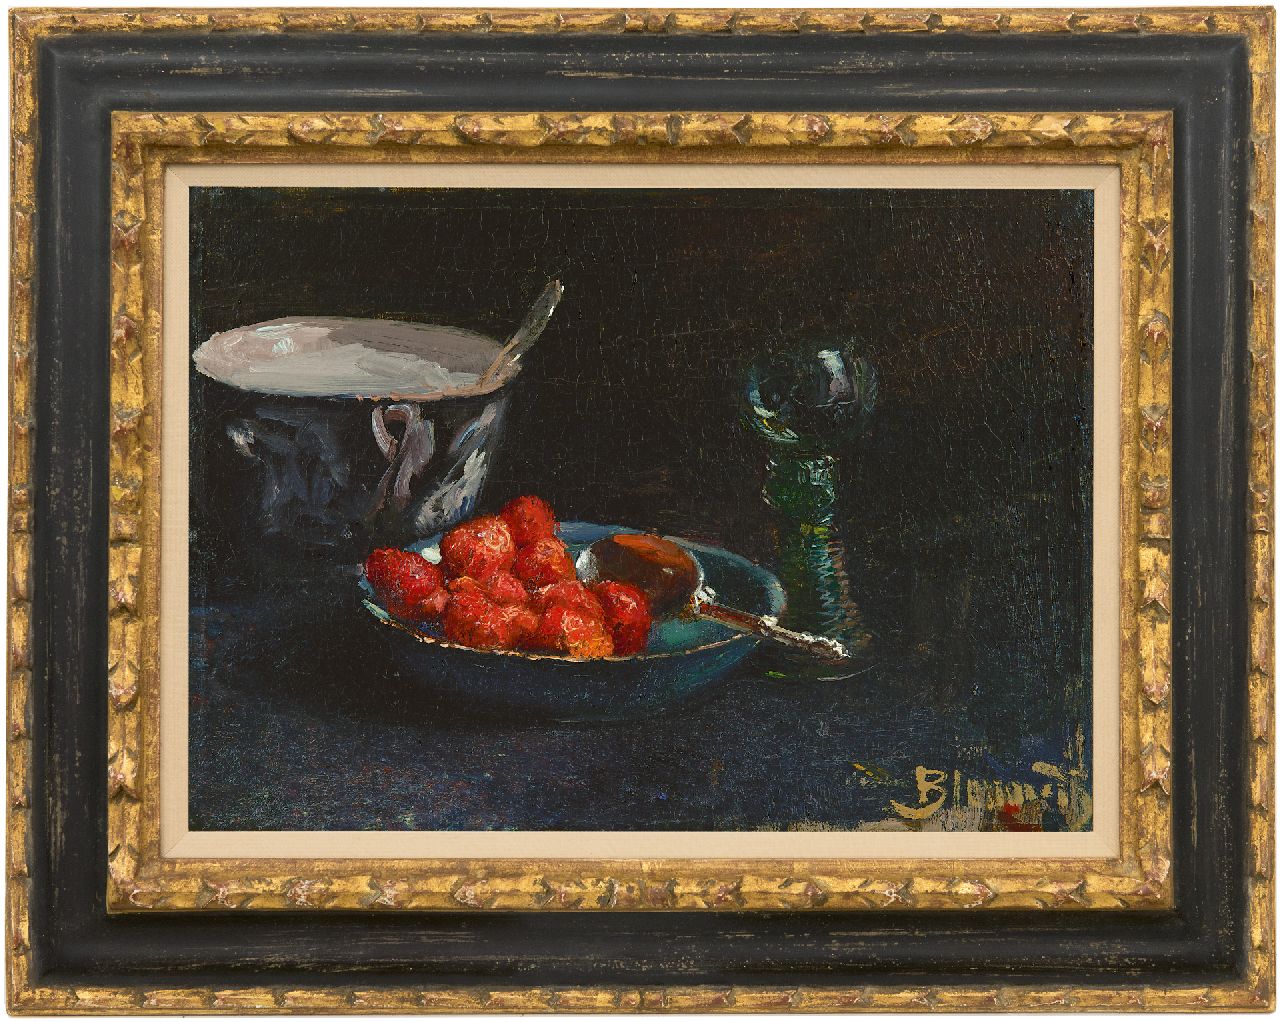 Blommers B.J.  | Bernardus Johannes Blommers | Paintings offered for sale | Strawberries with whipped cream and a Rhine wine glass, oil on canvas 28.8 x 40.0 cm, signed l.r. and painted ca. 1880